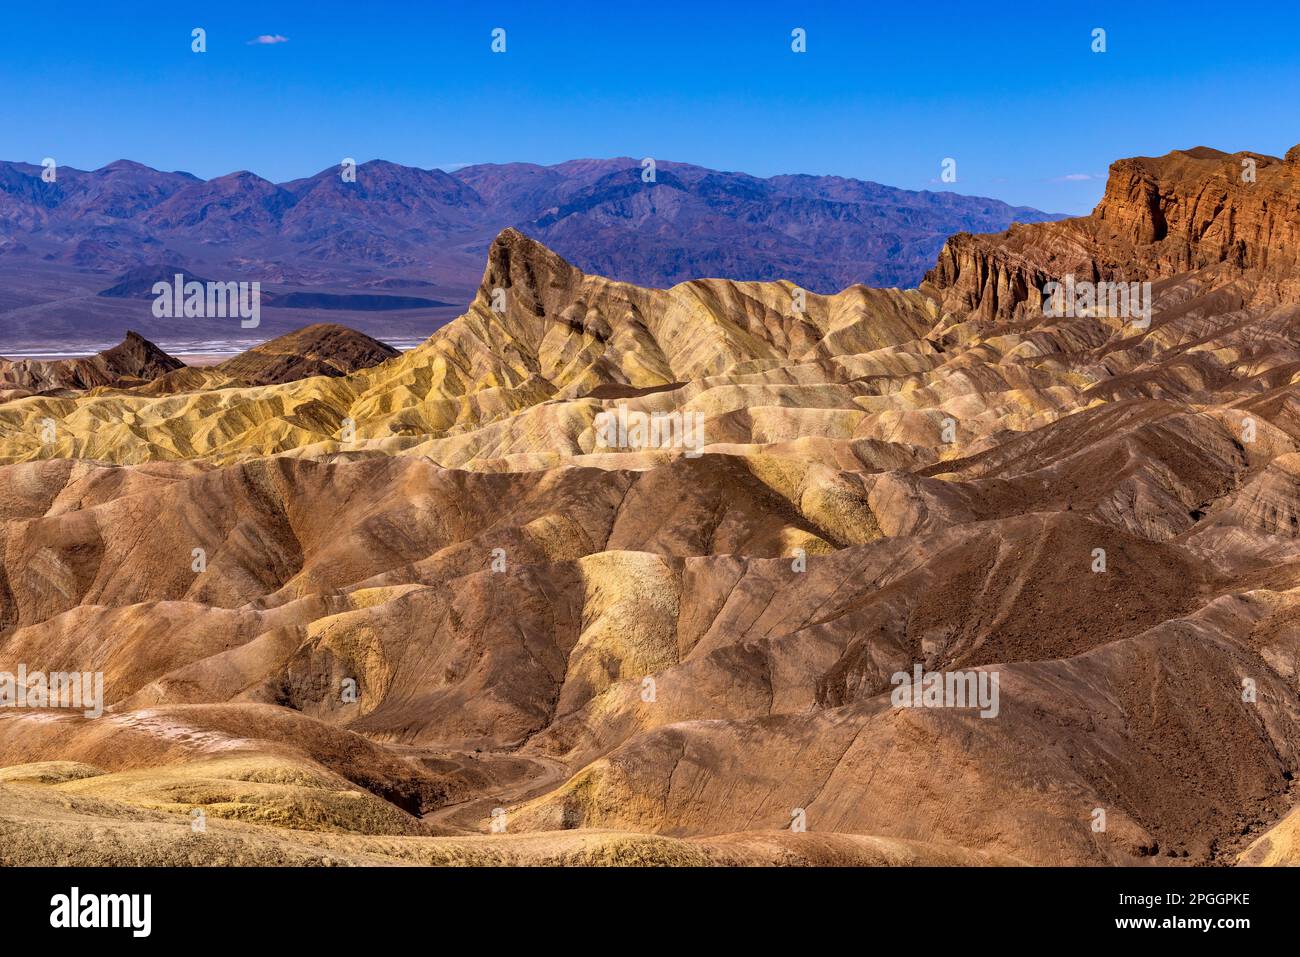 This is a view of the sandstone 'badlands' from Zabriskie Point at Death Valley National Park, California, USA. Manly Beacon is just left of center. Stock Photo